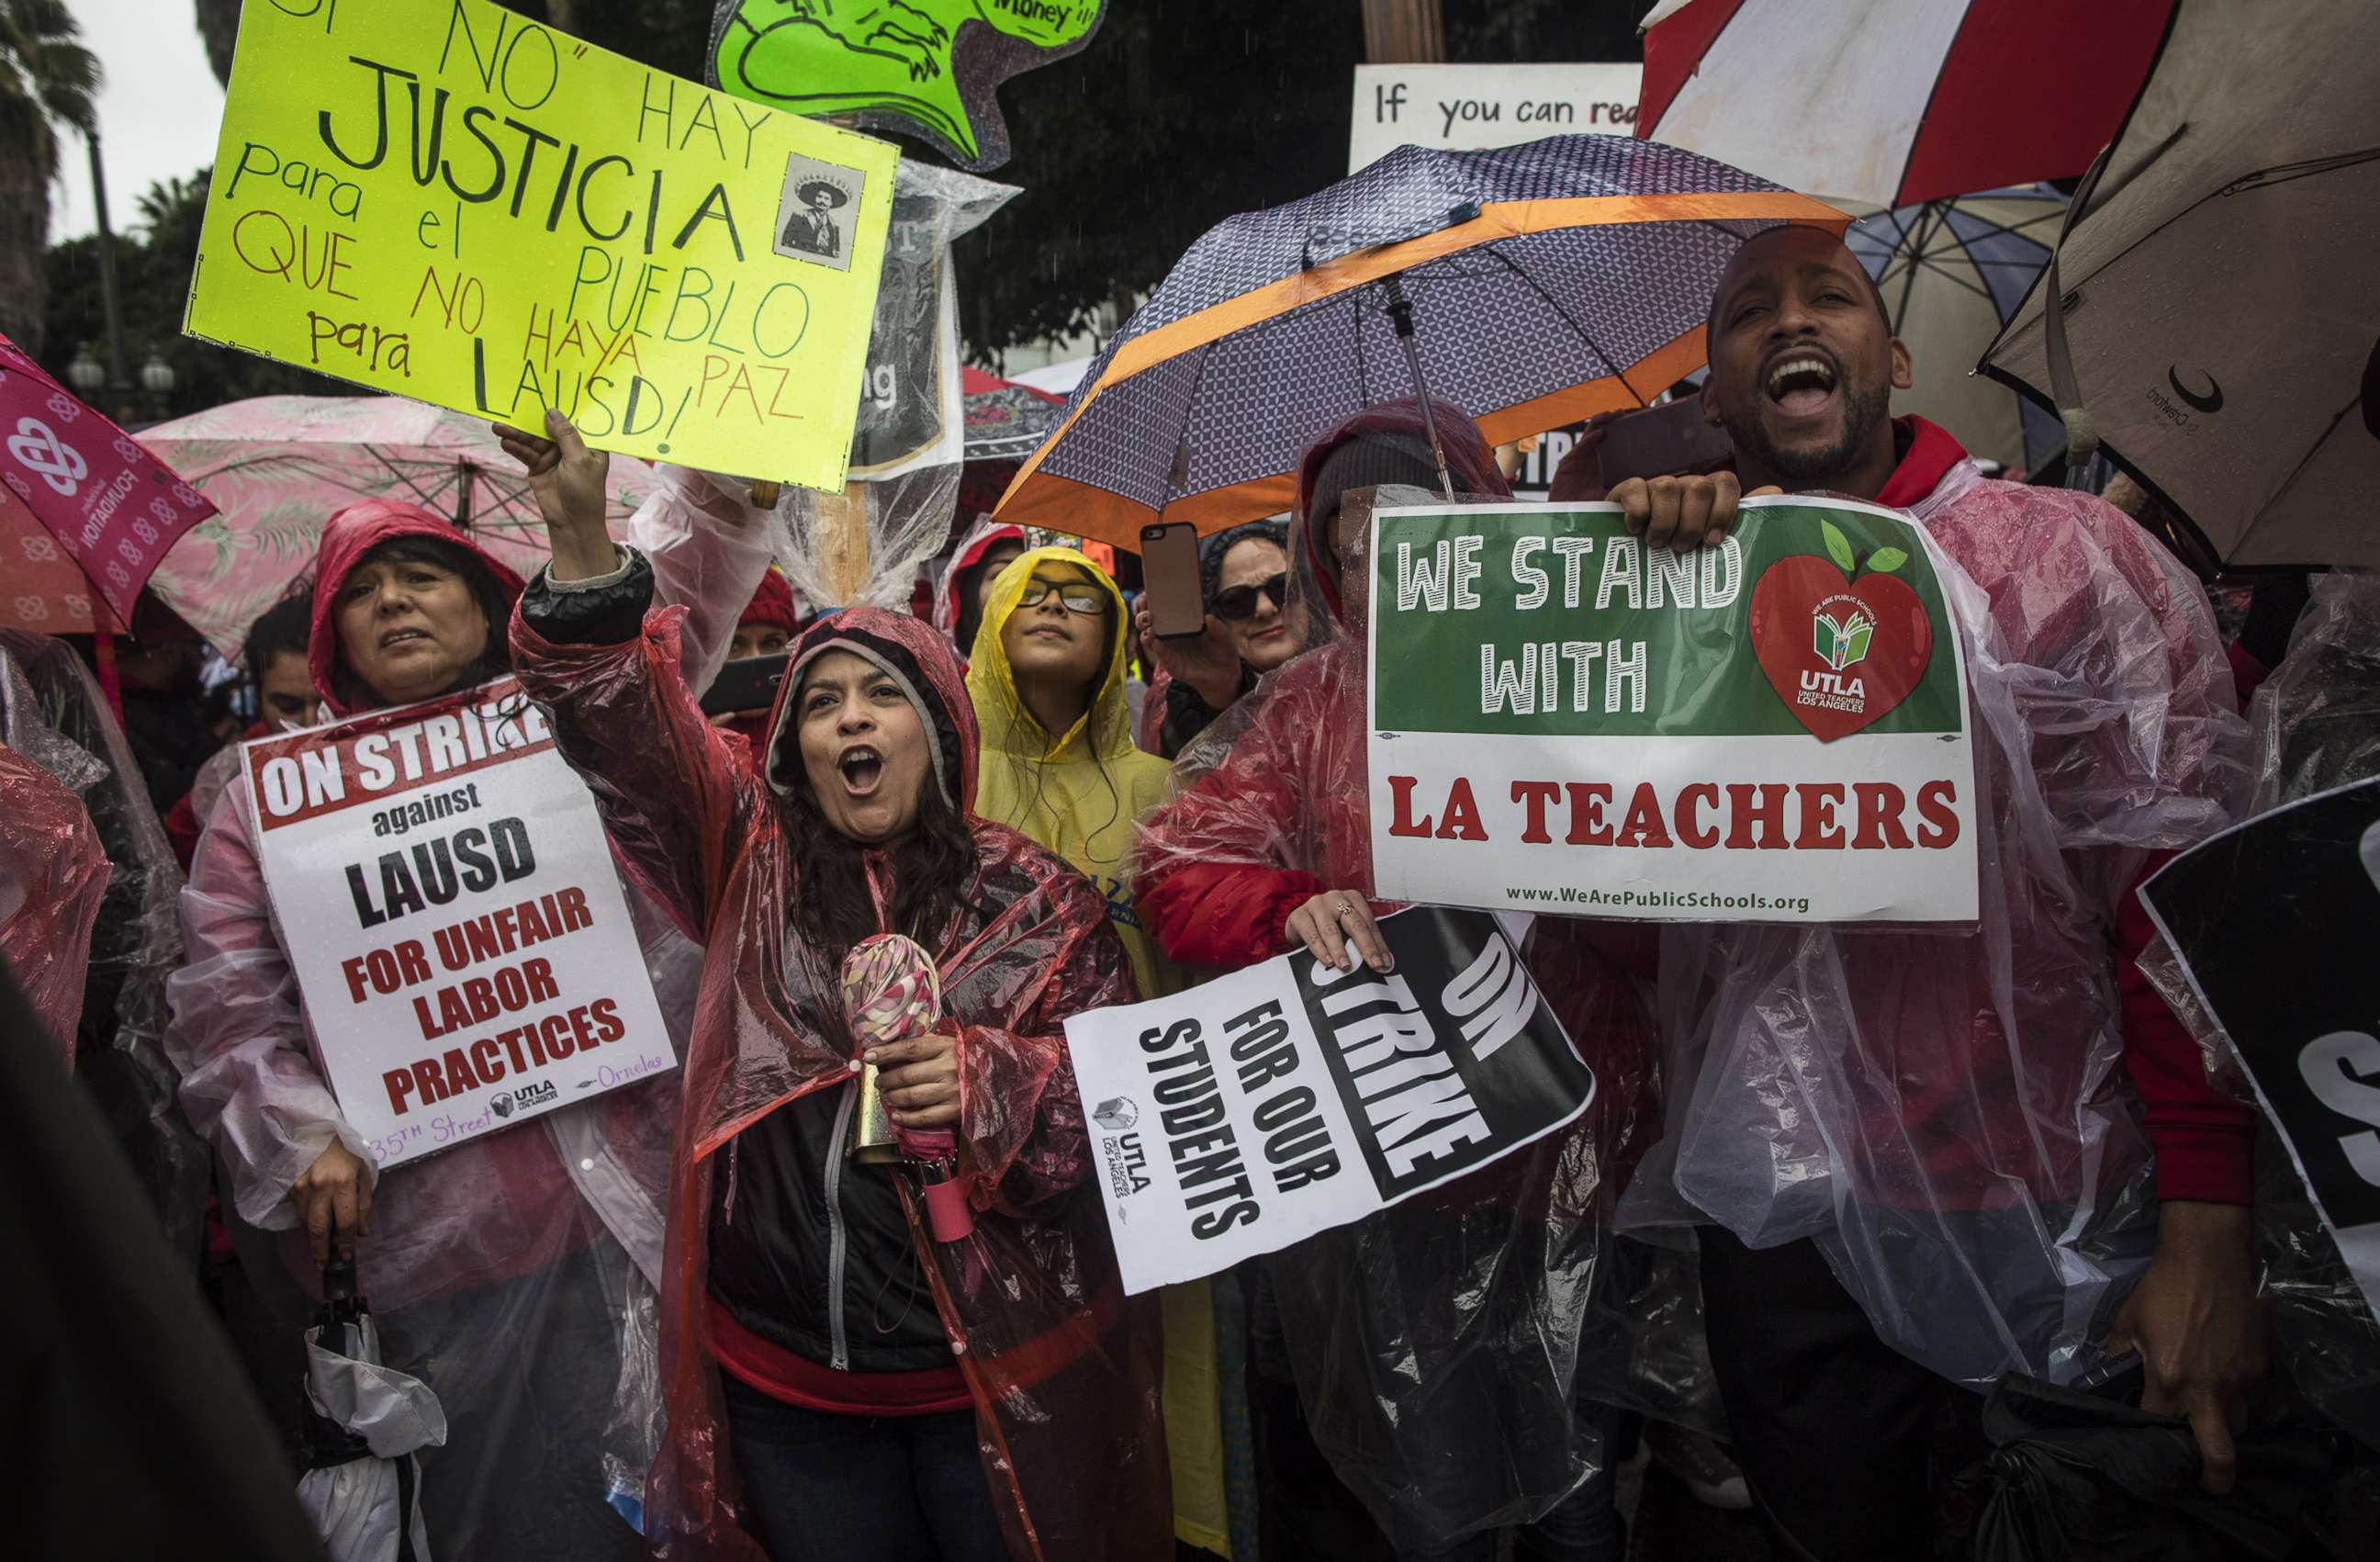 PHOTO: People rally in the streets of downtown in the pouring rain during a United Teachers Los Angeles strike on Jan. 14, 2019, in Los Angeles.